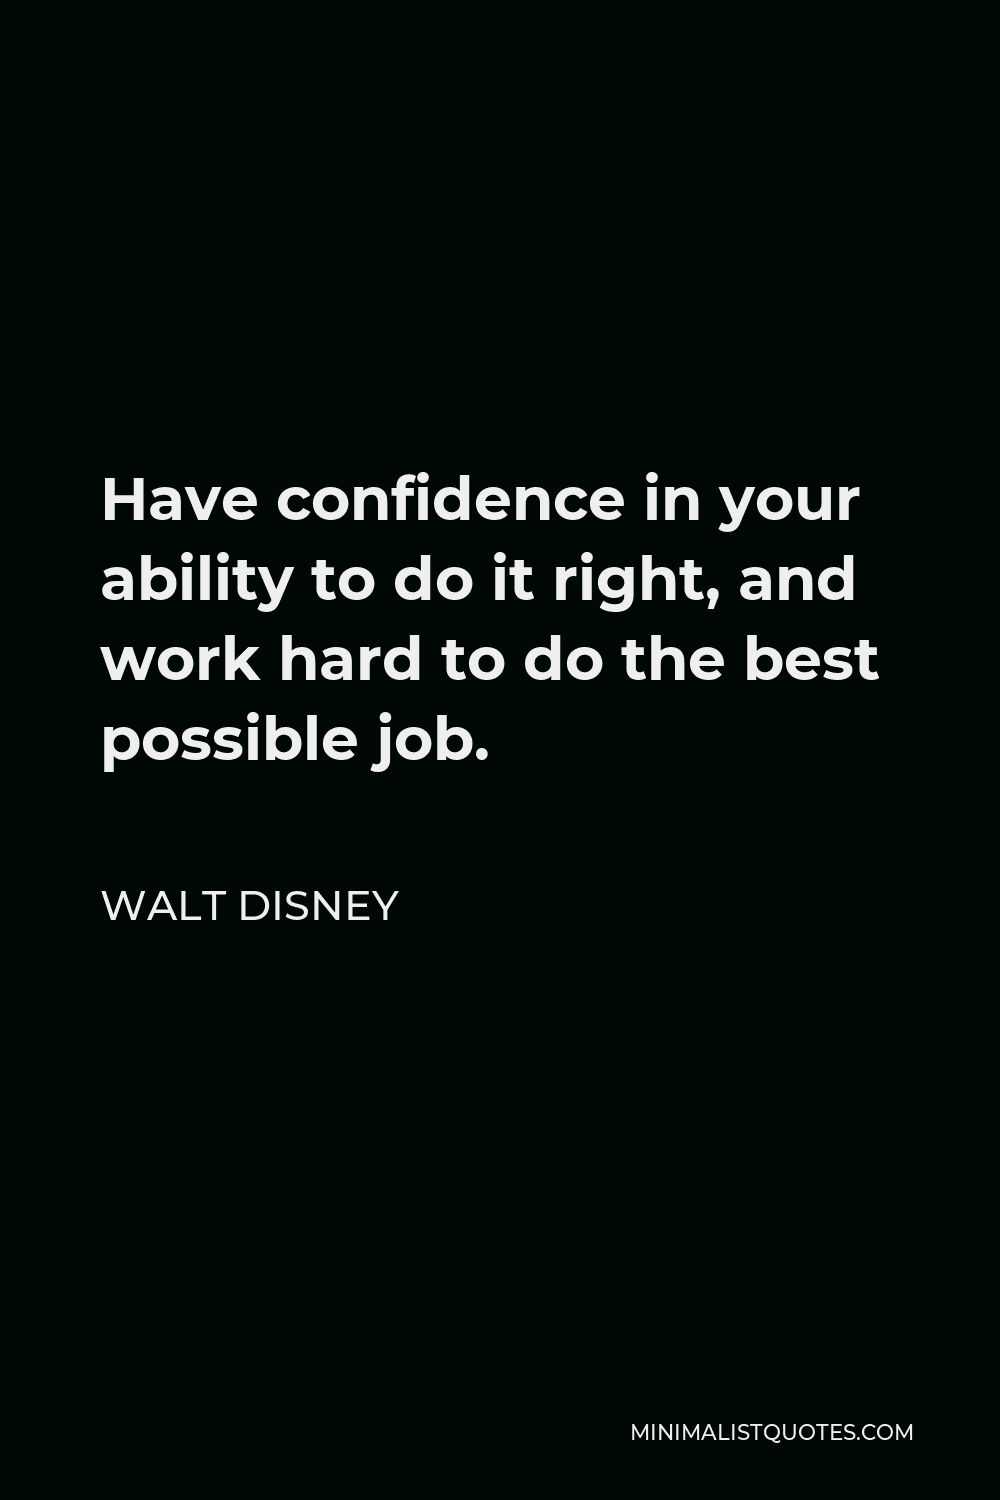 Walt Disney Quote - Have confidence in your ability to do it right, and work hard to do the best possible job.